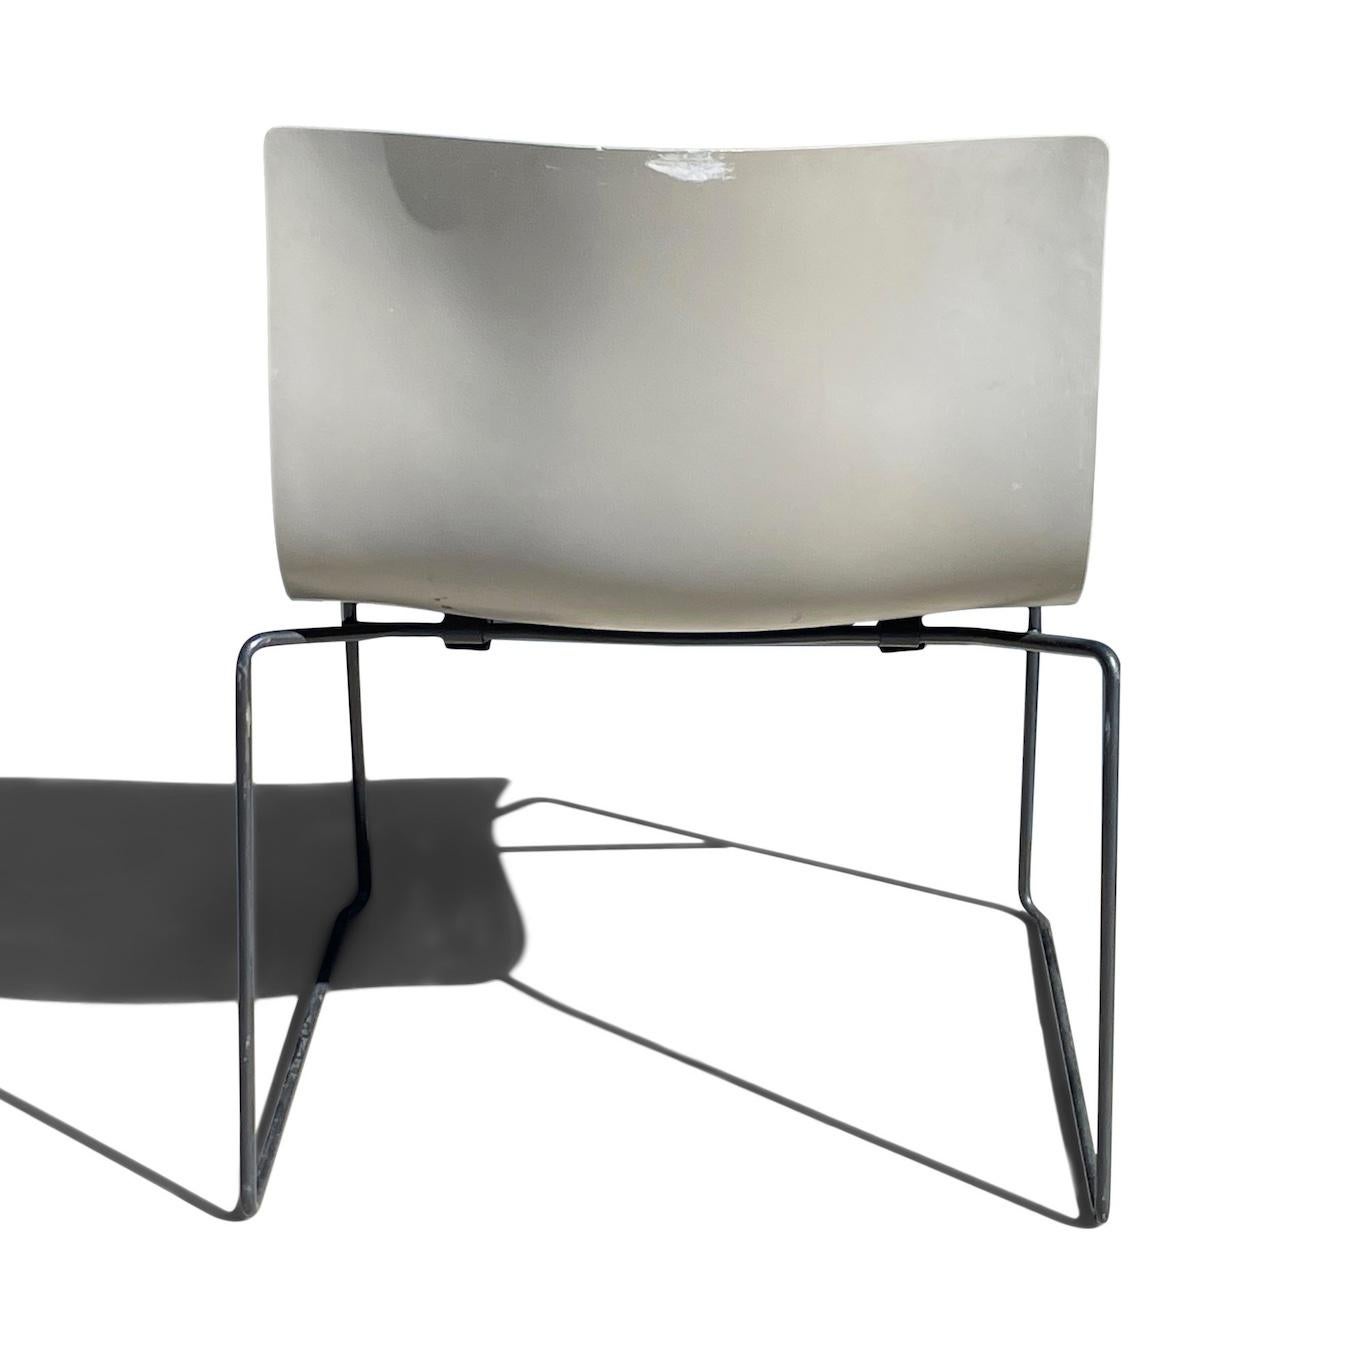 Set of 5 Grey Handkerchief Chairs by Lella and Massimo Vignelli for Knoll 2